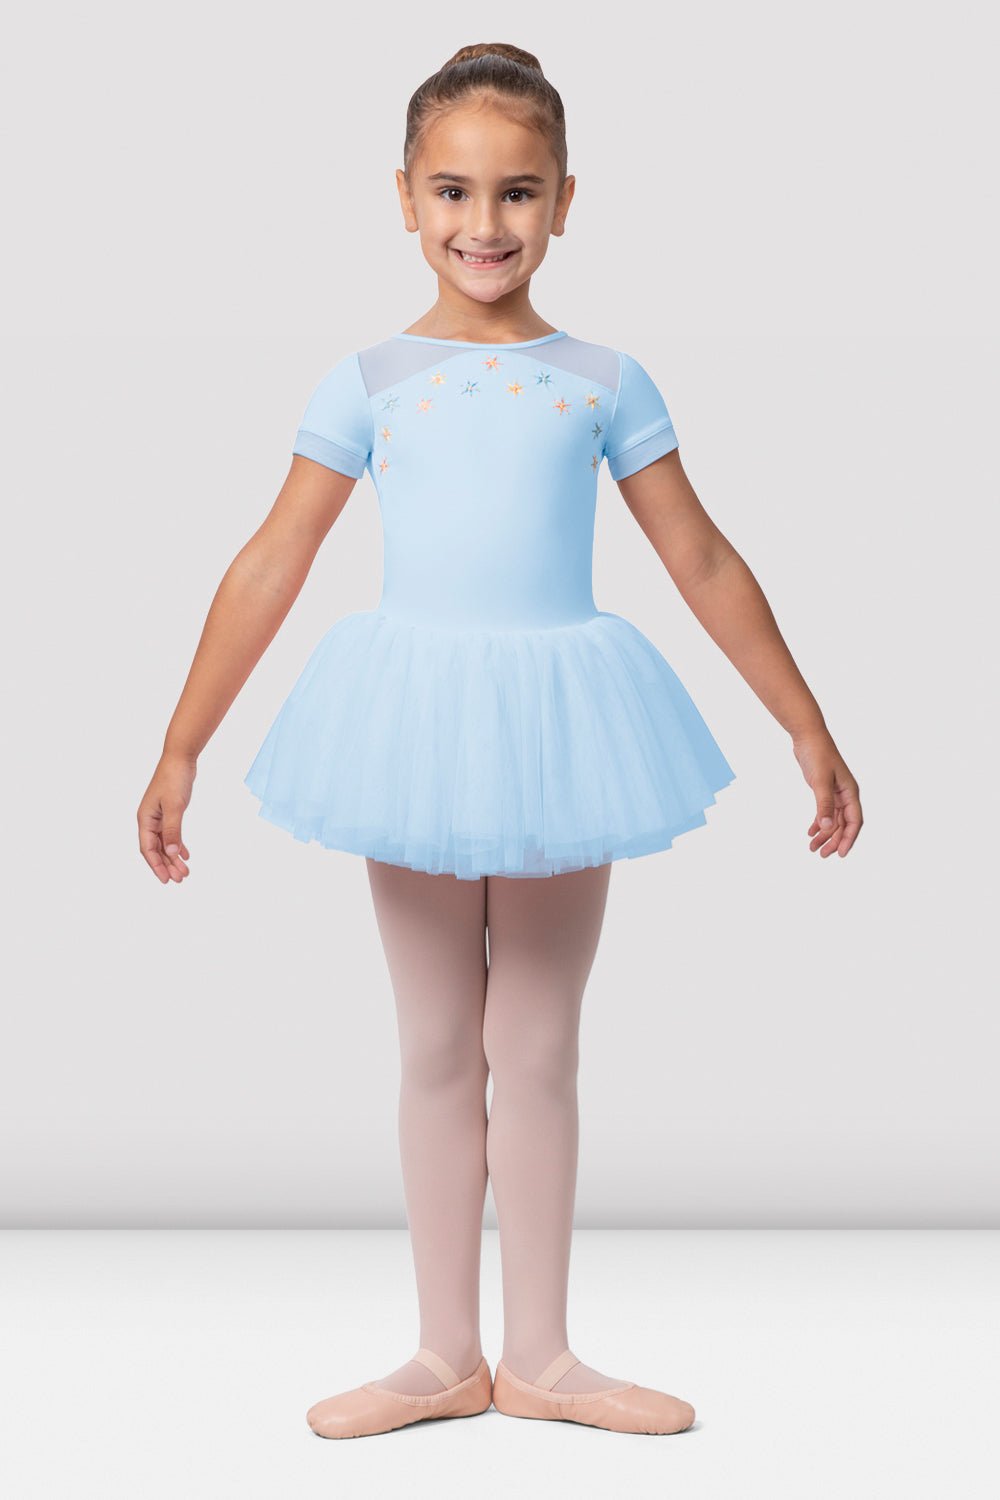 flower girls tights by Tappers and Pointers Girls white sheer ballet dance